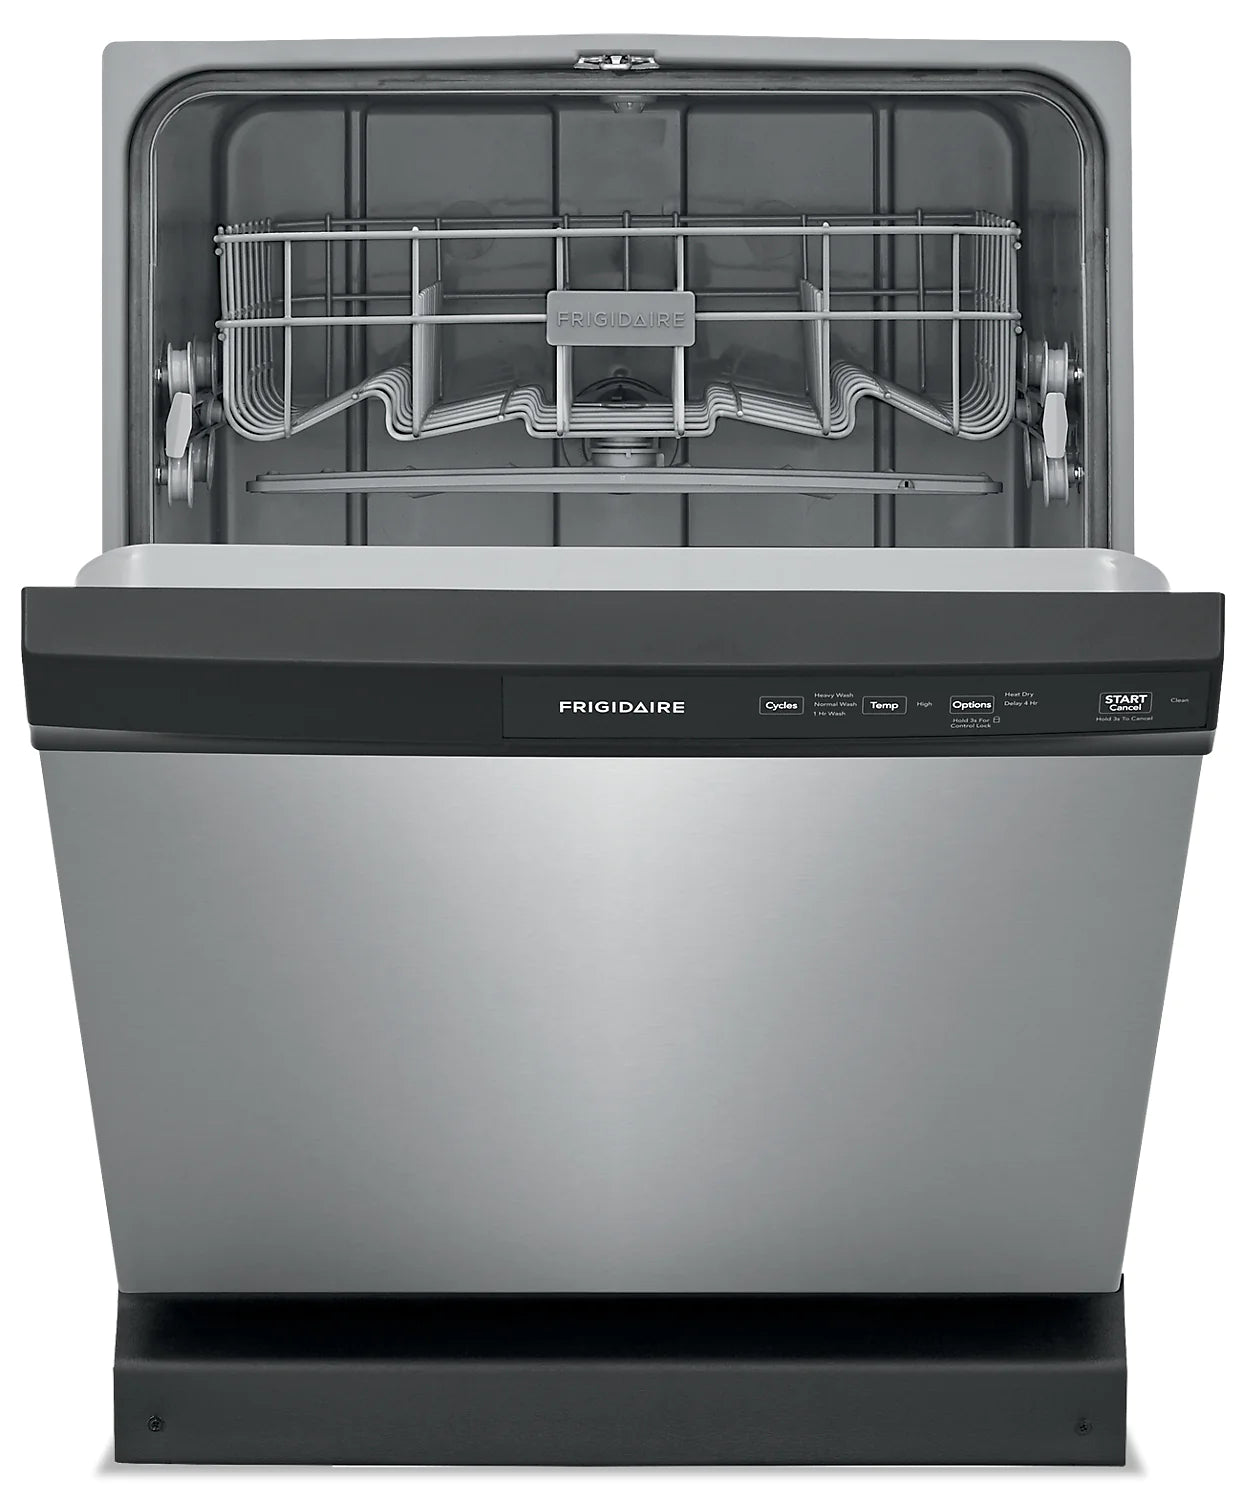 Frigidaire Dishwashers 24" Stainless steel FFCD2413US